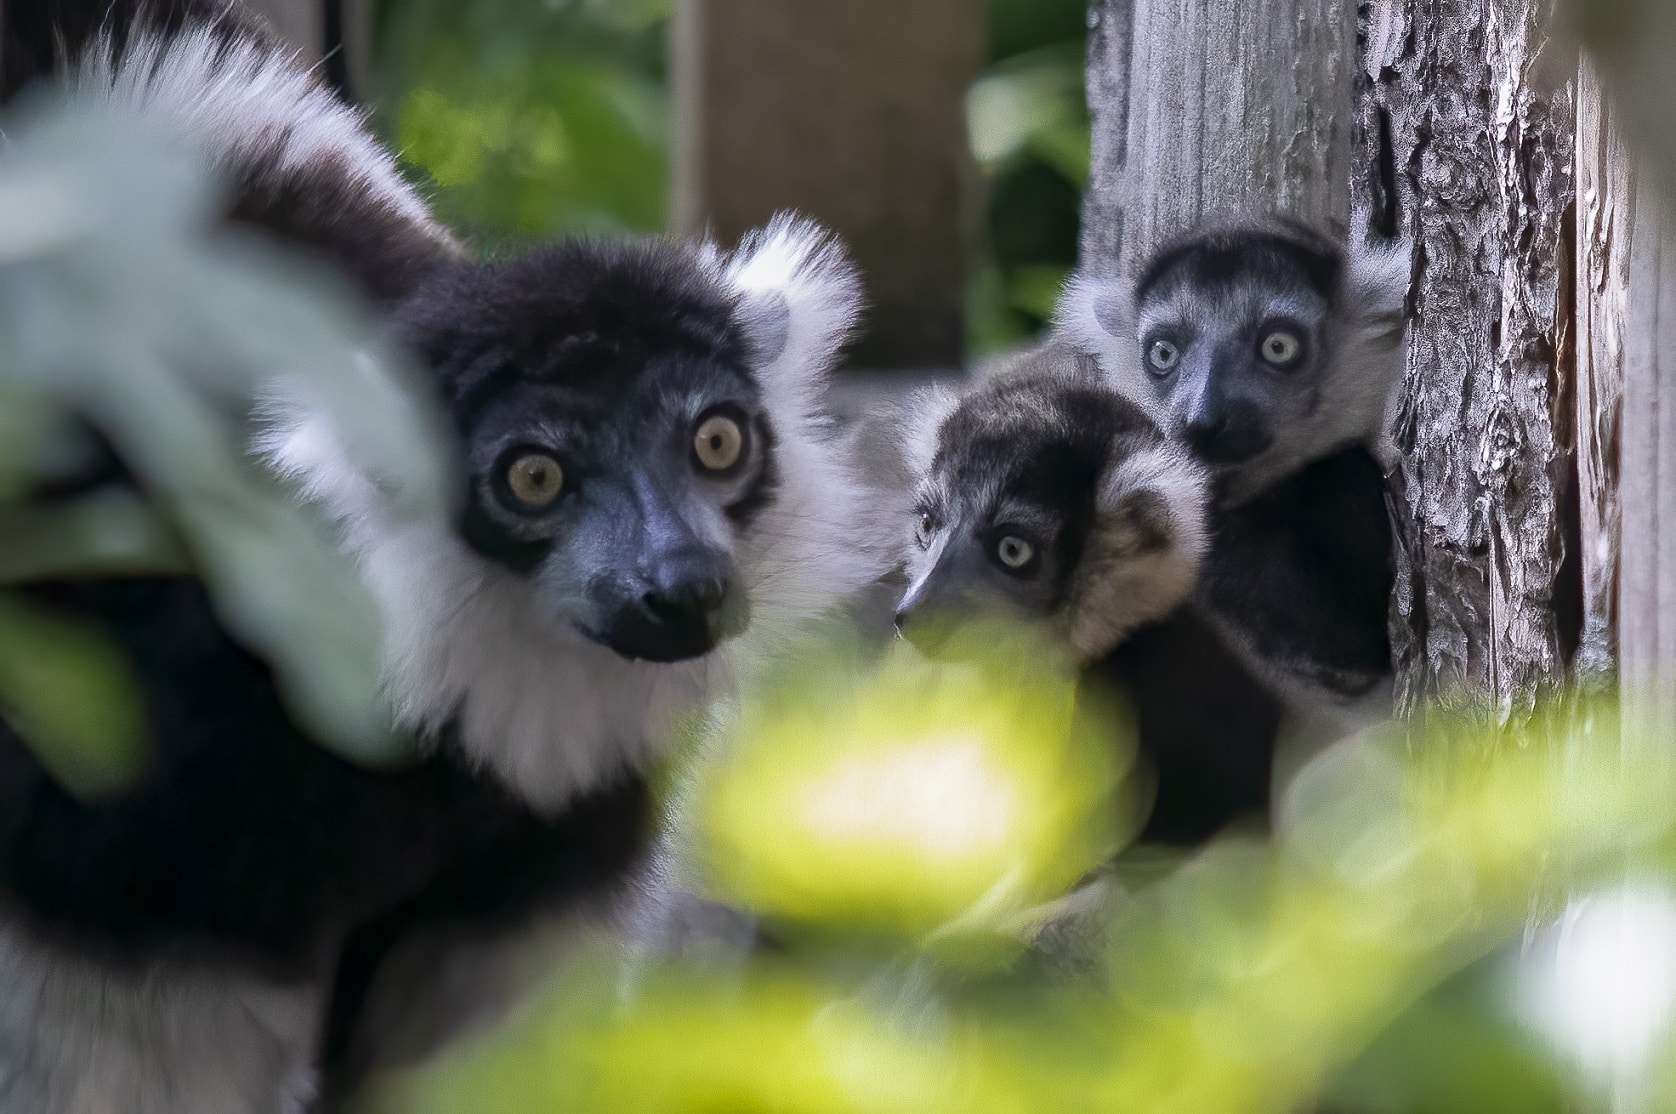 Triple trouble for Newquay Zoo with arrival of three rare lemur pups